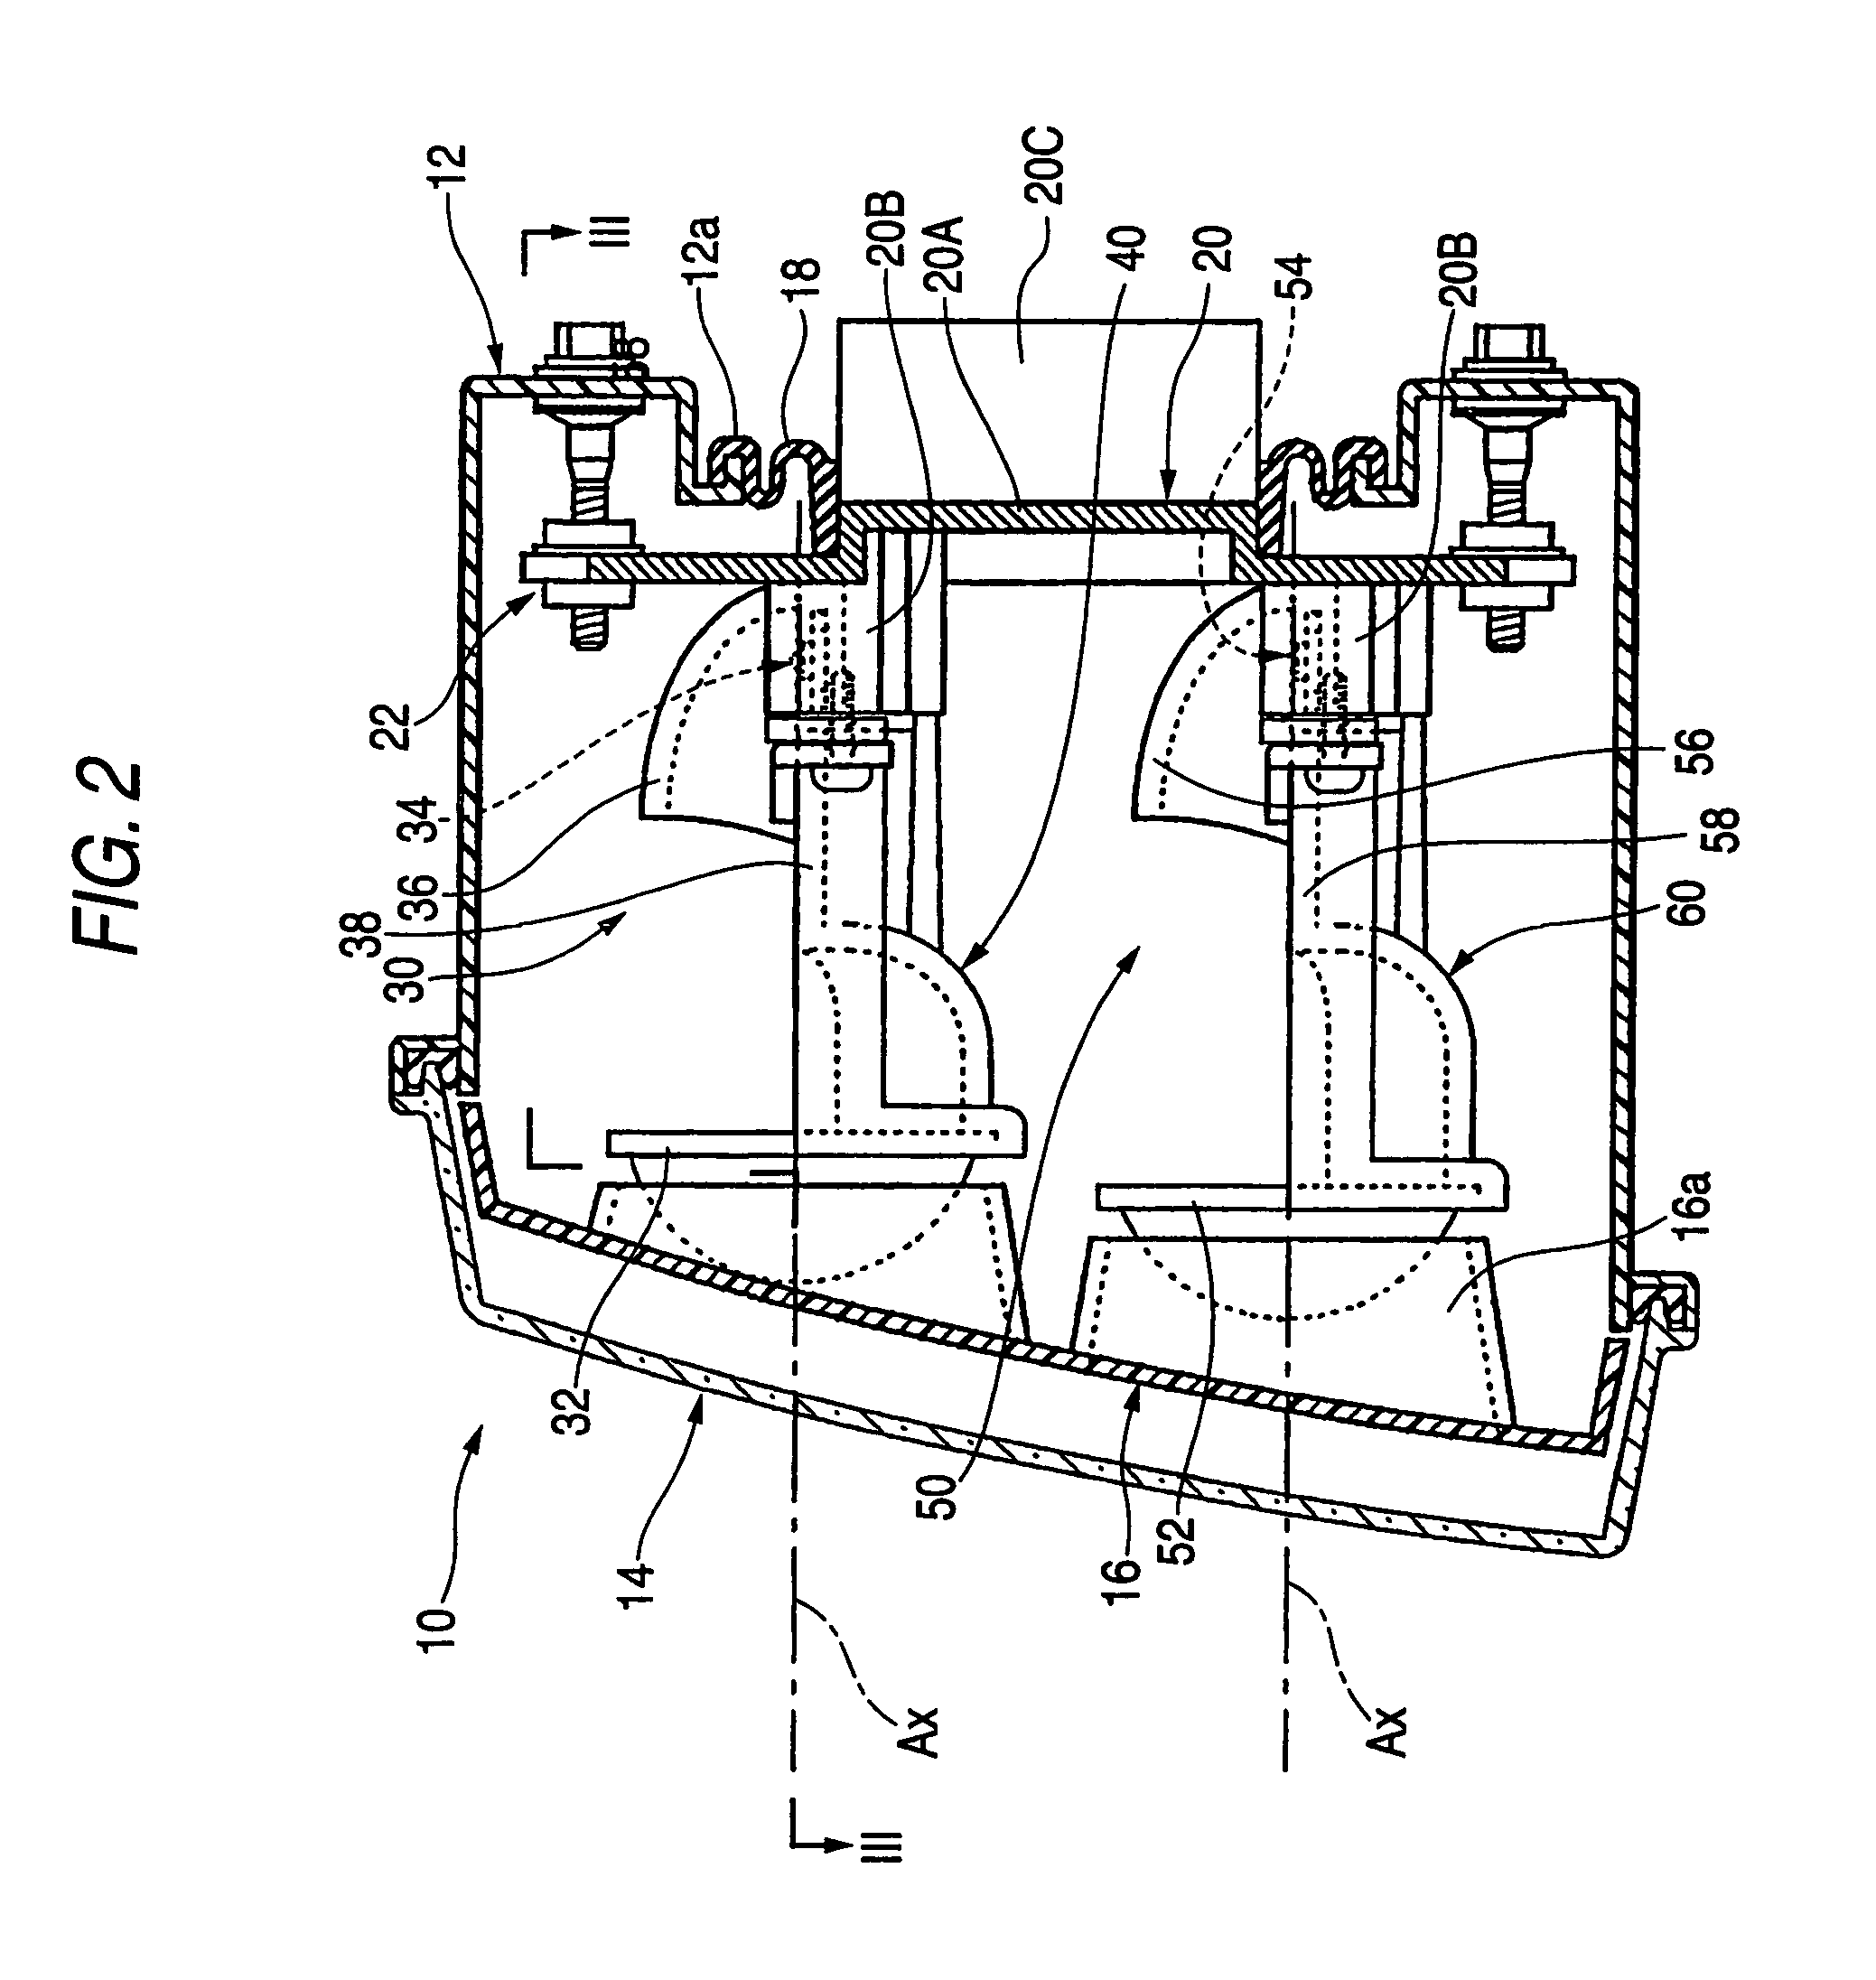 Vehicle headlight including a plurality of led lighting device units